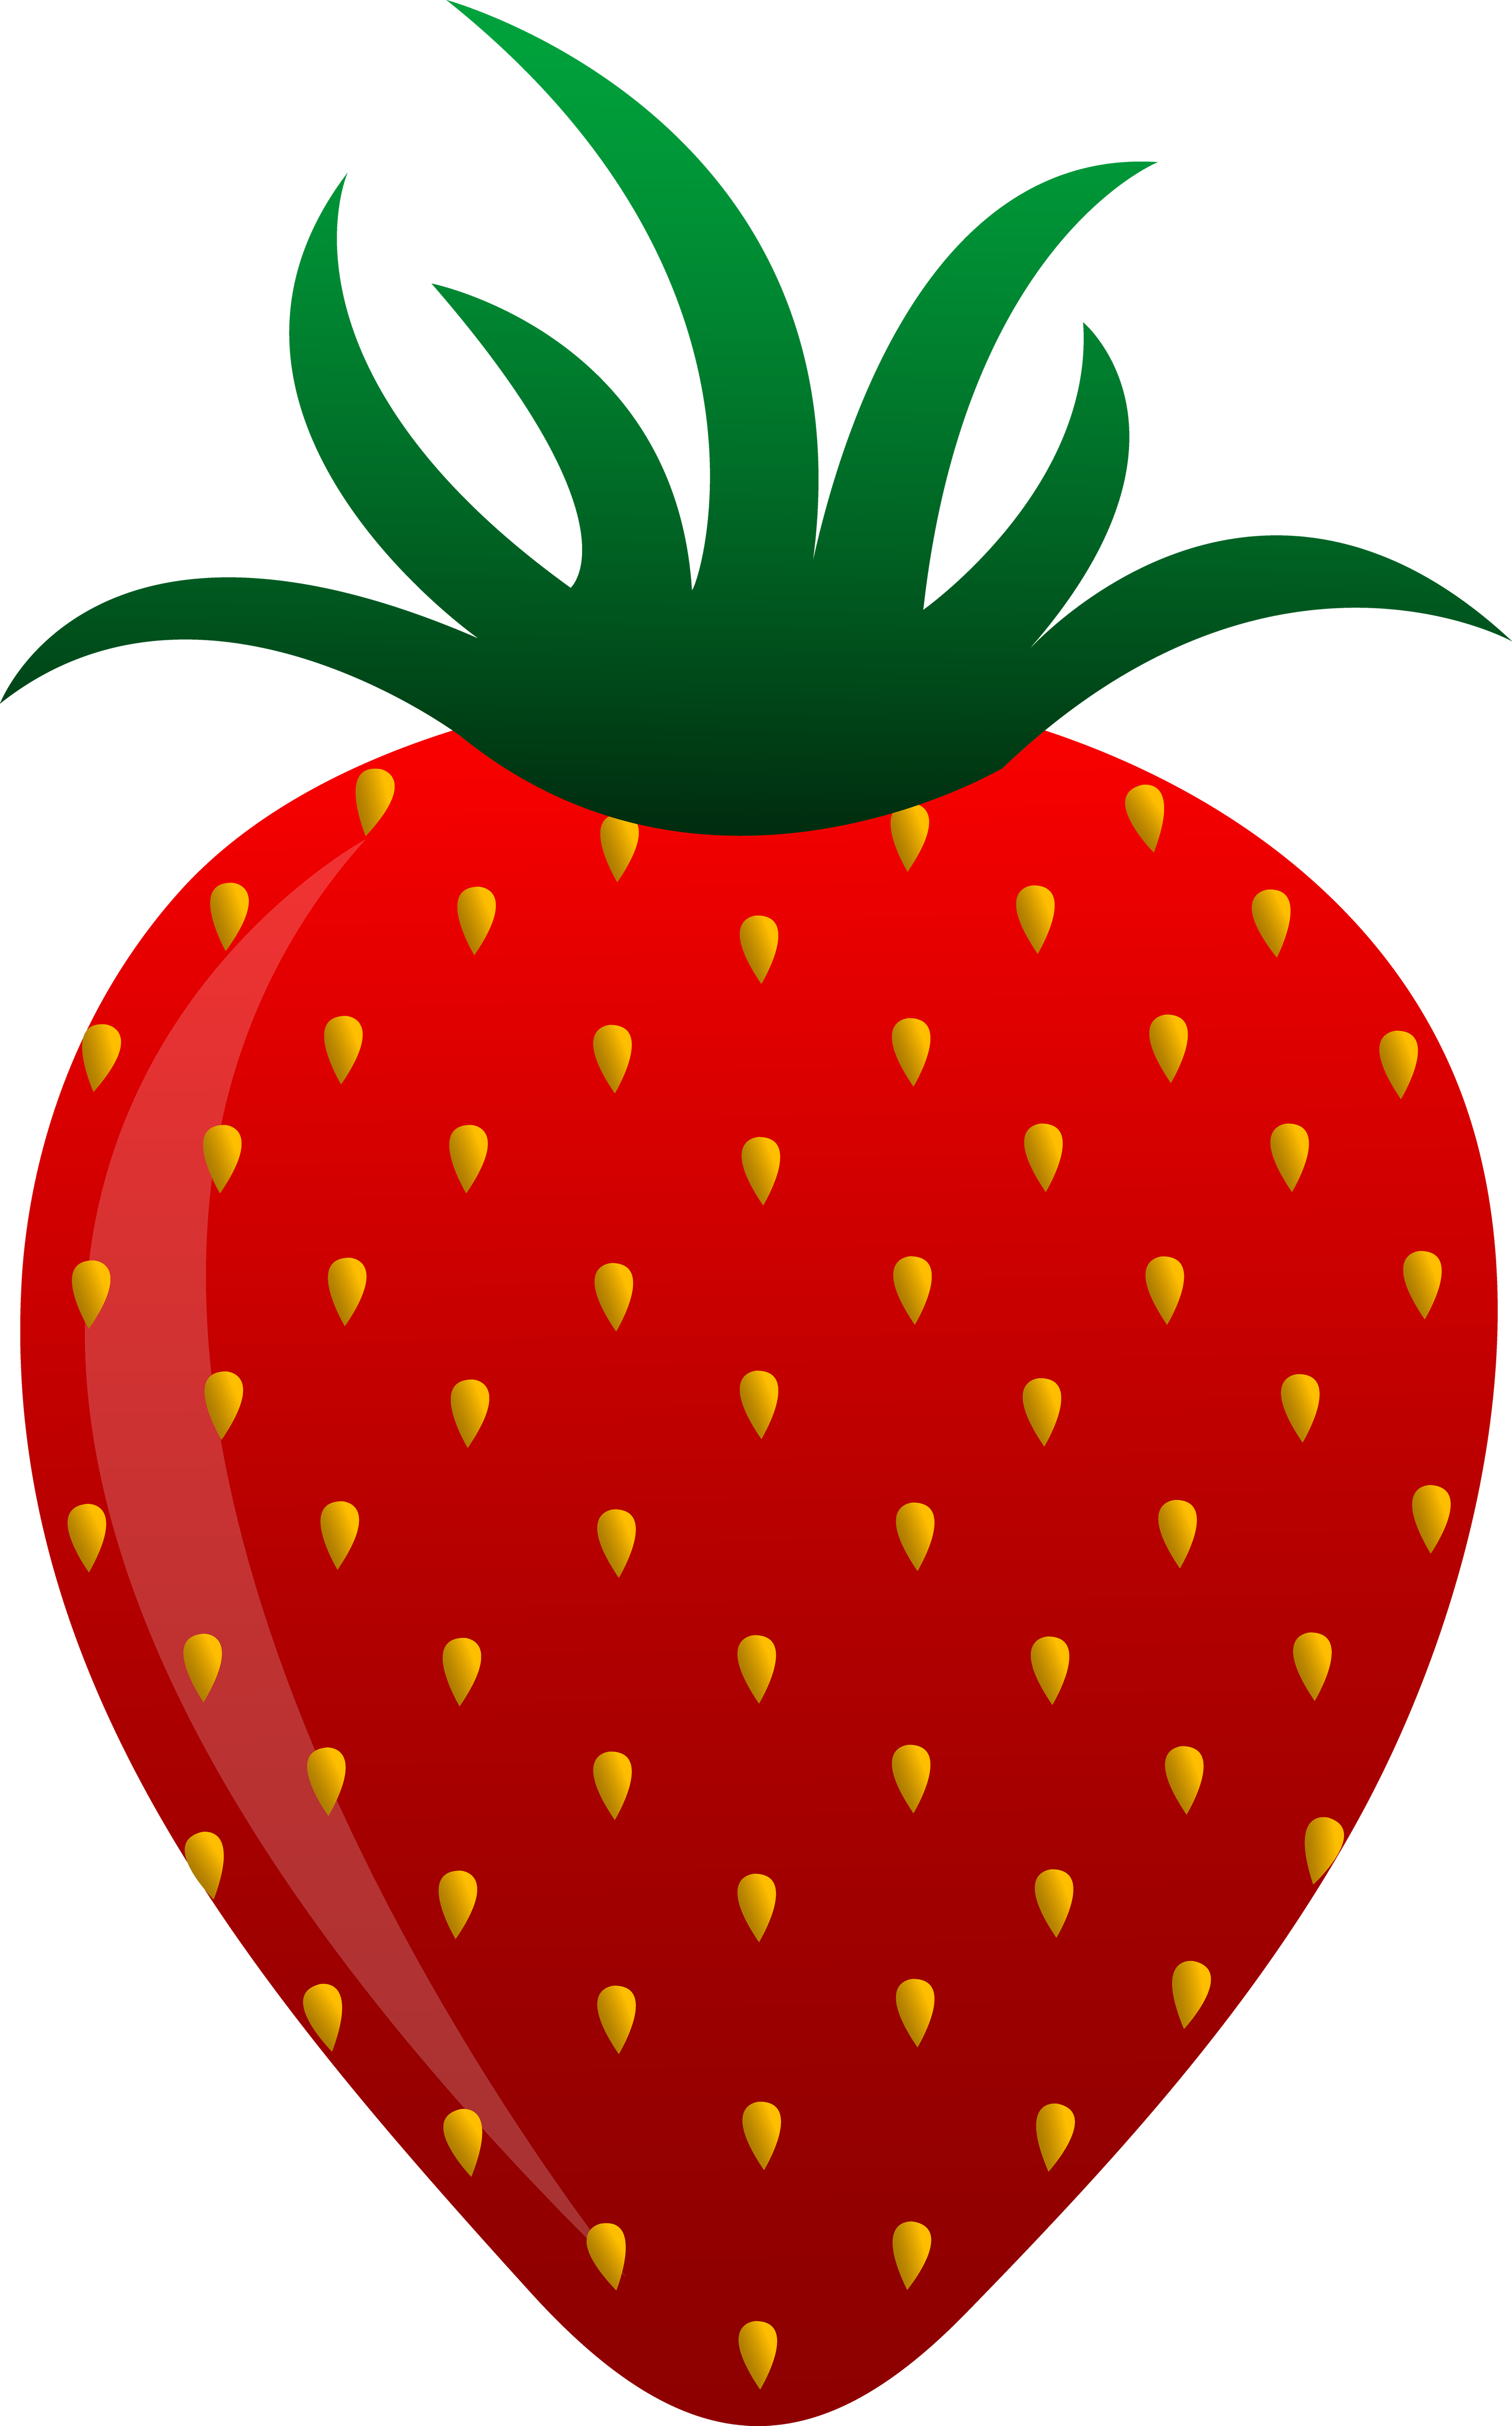 Strawberry clip art free clipart images 3 - FamClipart